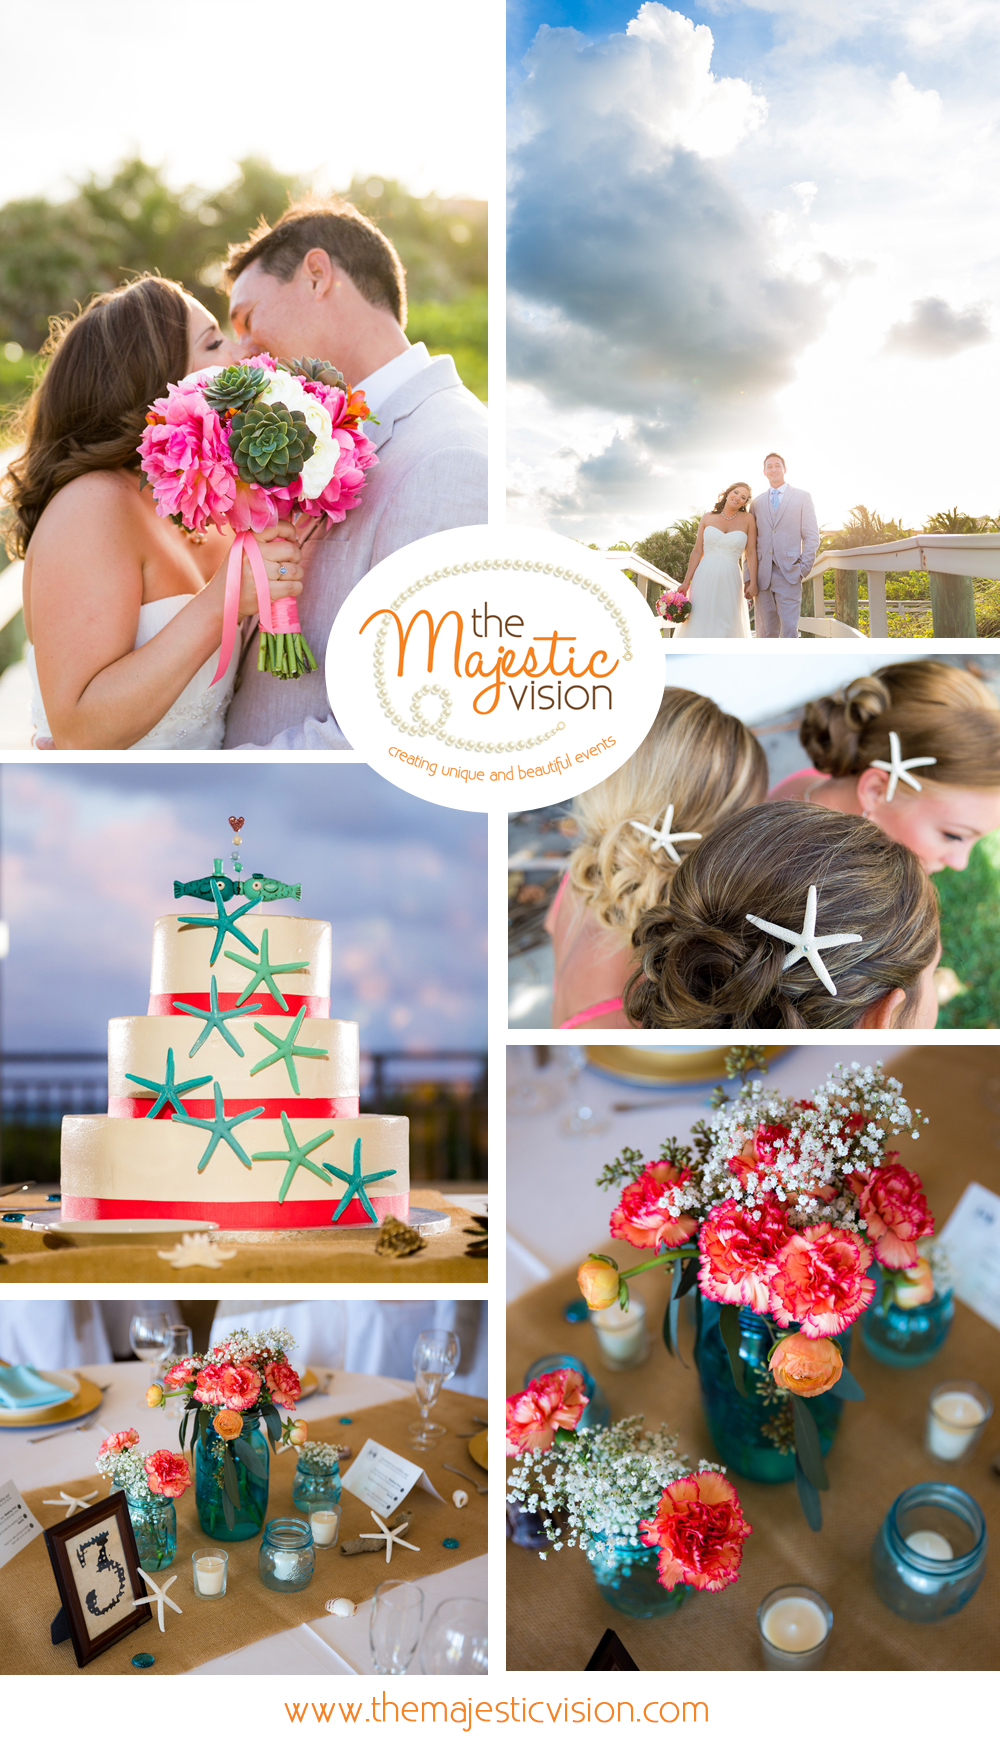 Rustic Coral and Burlap Beach Wedding | The Majestic Vision Wedding Planning | Palm Beach Shores Community Center in Palm Beach, FL | www.themajesticvision.com | Chris Kruger Photography